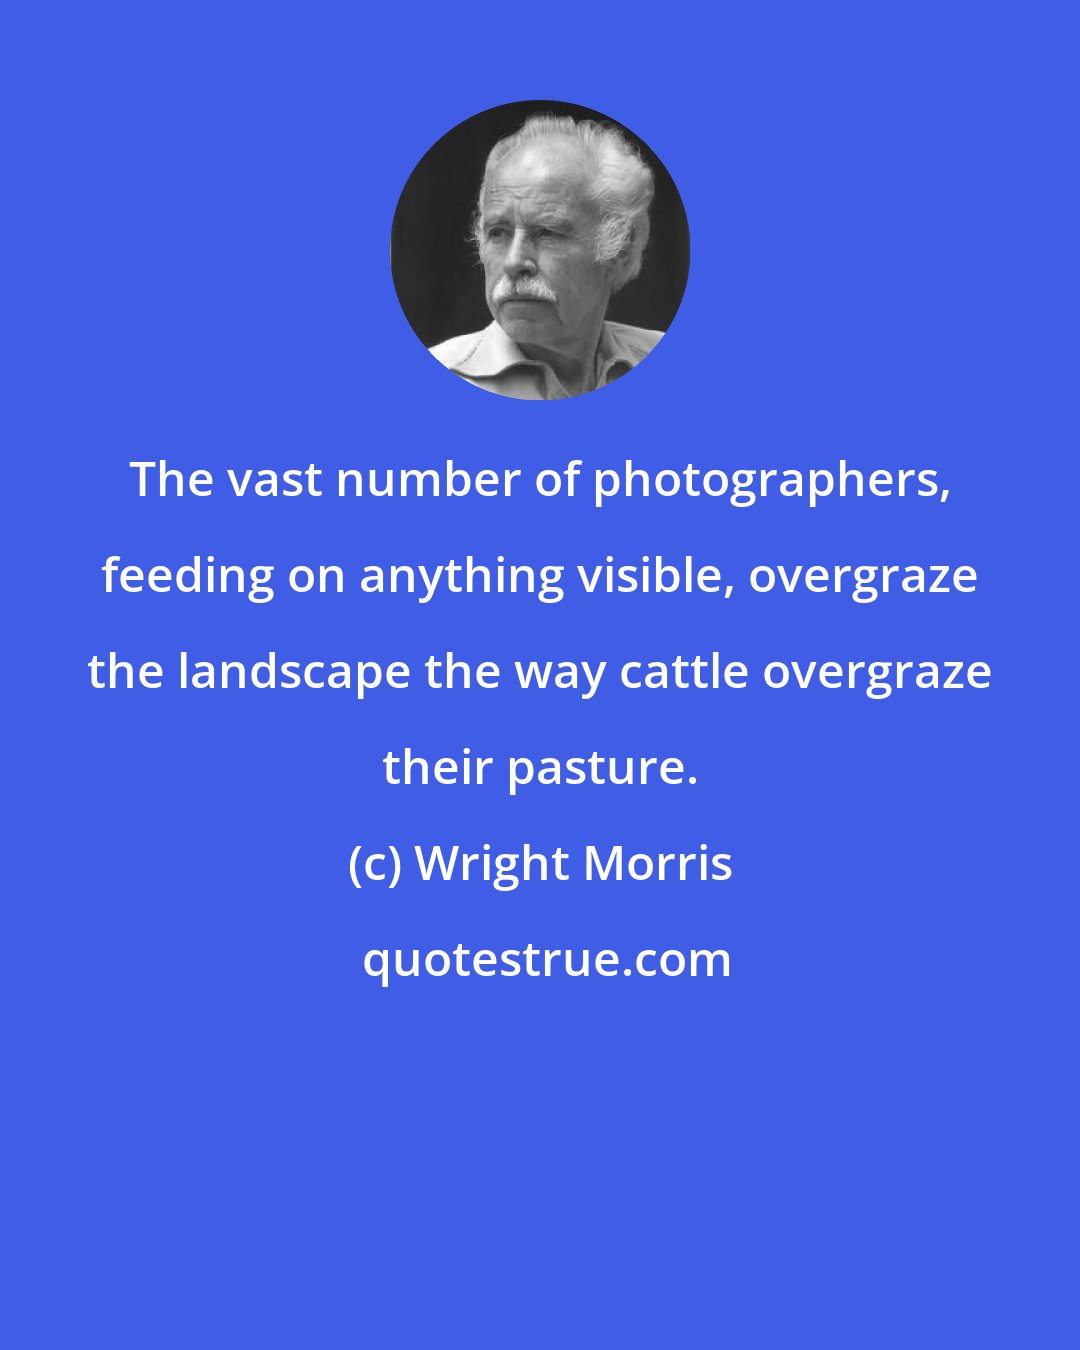 Wright Morris: The vast number of photographers, feeding on anything visible, overgraze the landscape the way cattle overgraze their pasture.